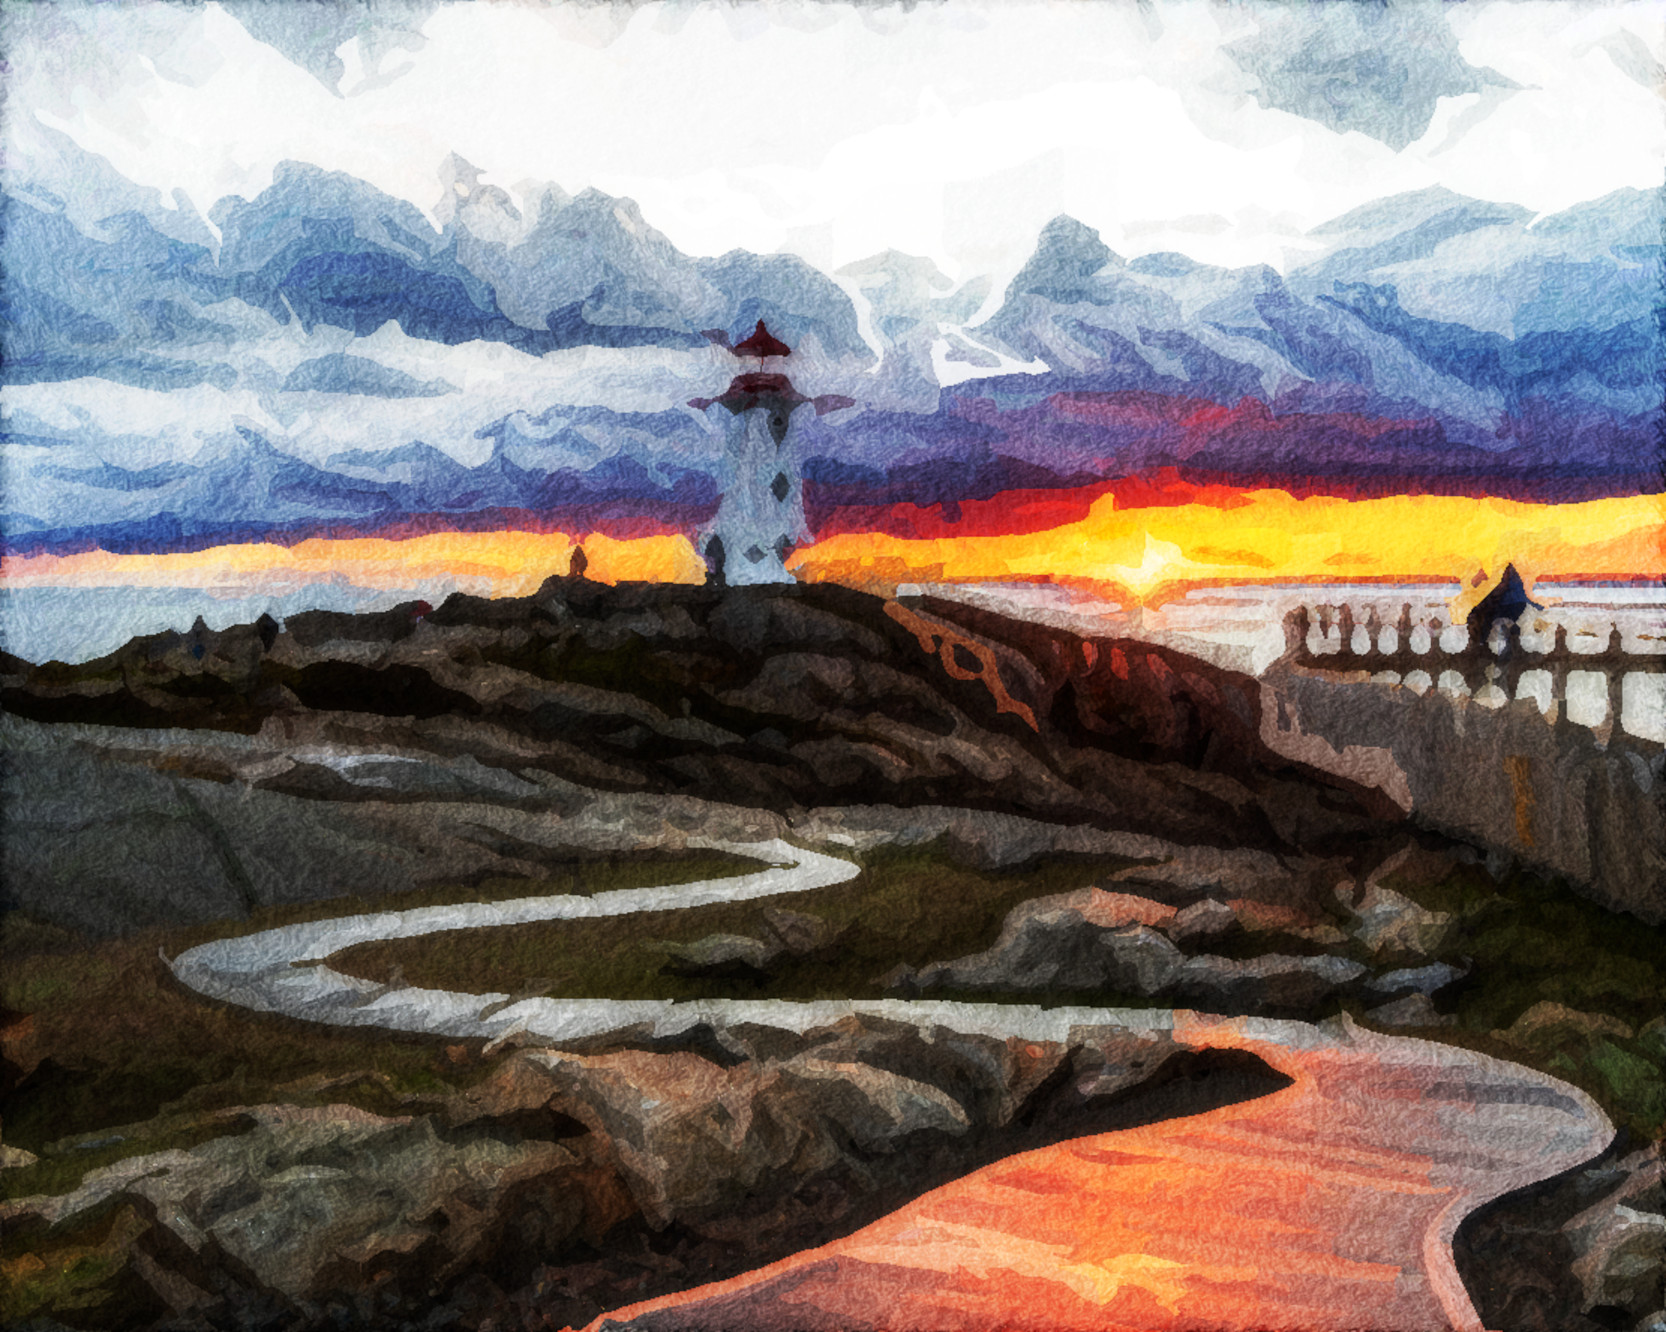 sunset_at_peggy_s_cove_lighthouse_by_thephotographer052_DeviantArt_DN_SimpleGraphics.jpg